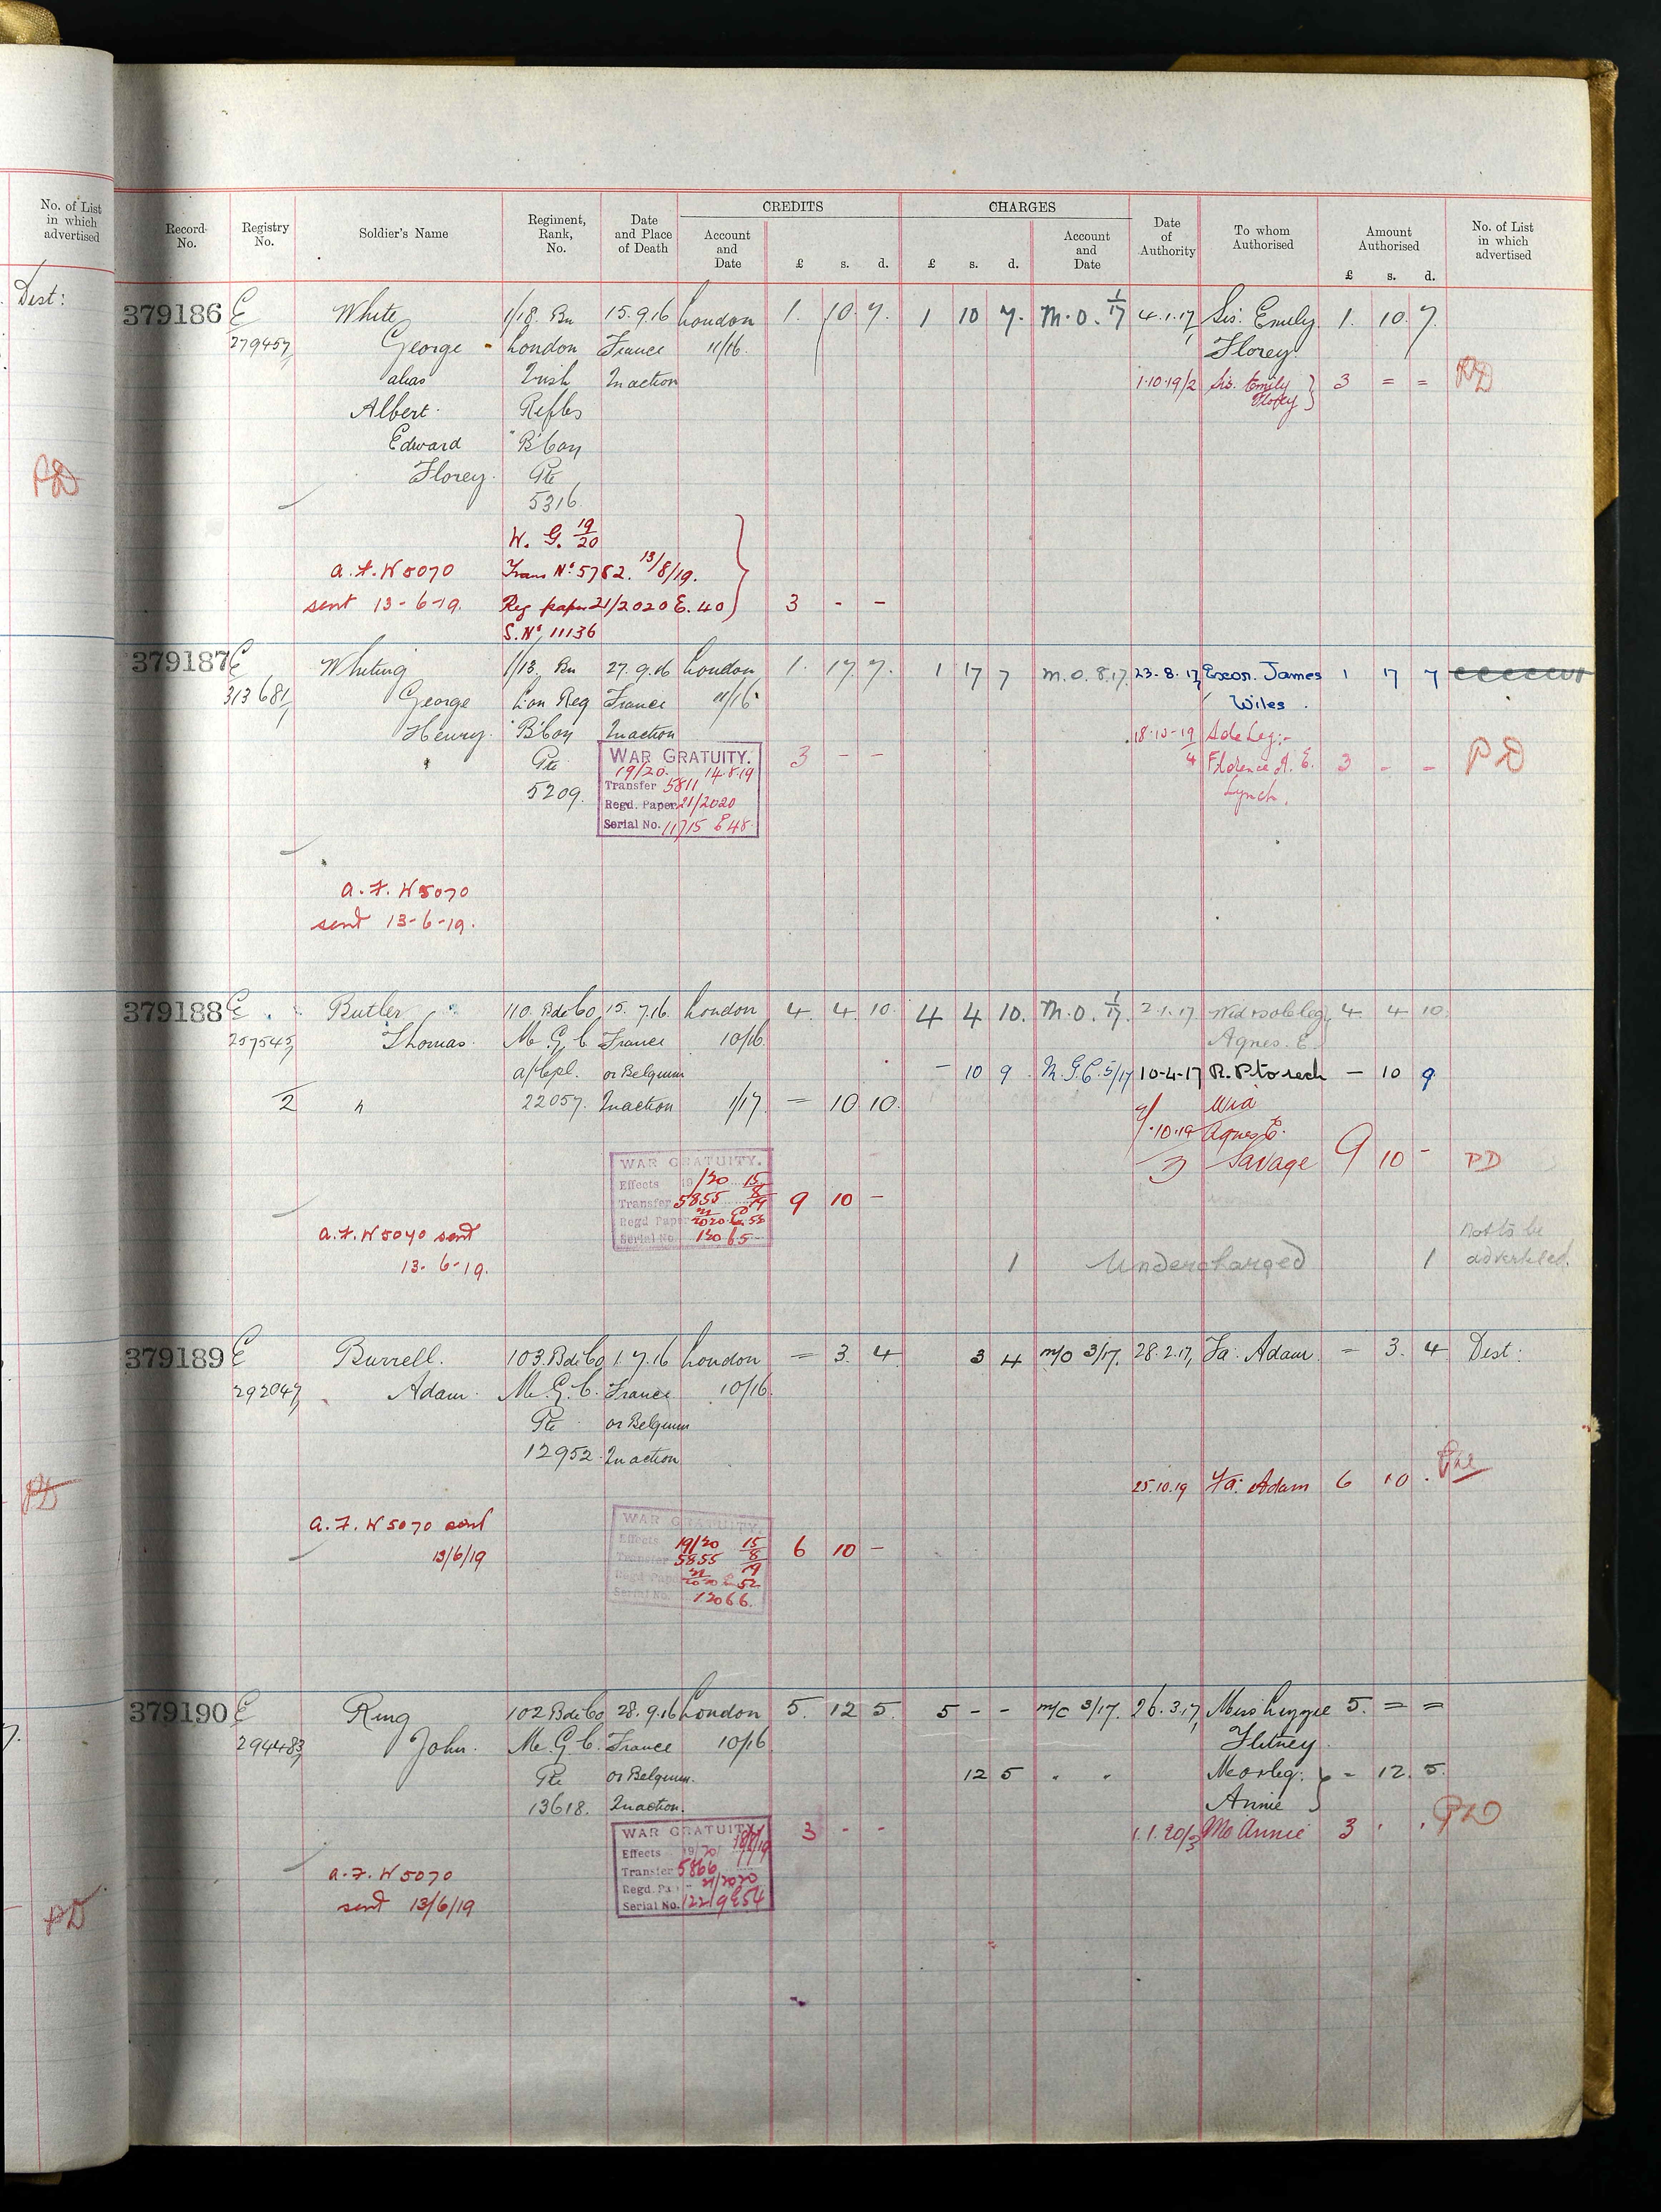 UK, Army Registers of Soldiers' Effects, 1901-1929